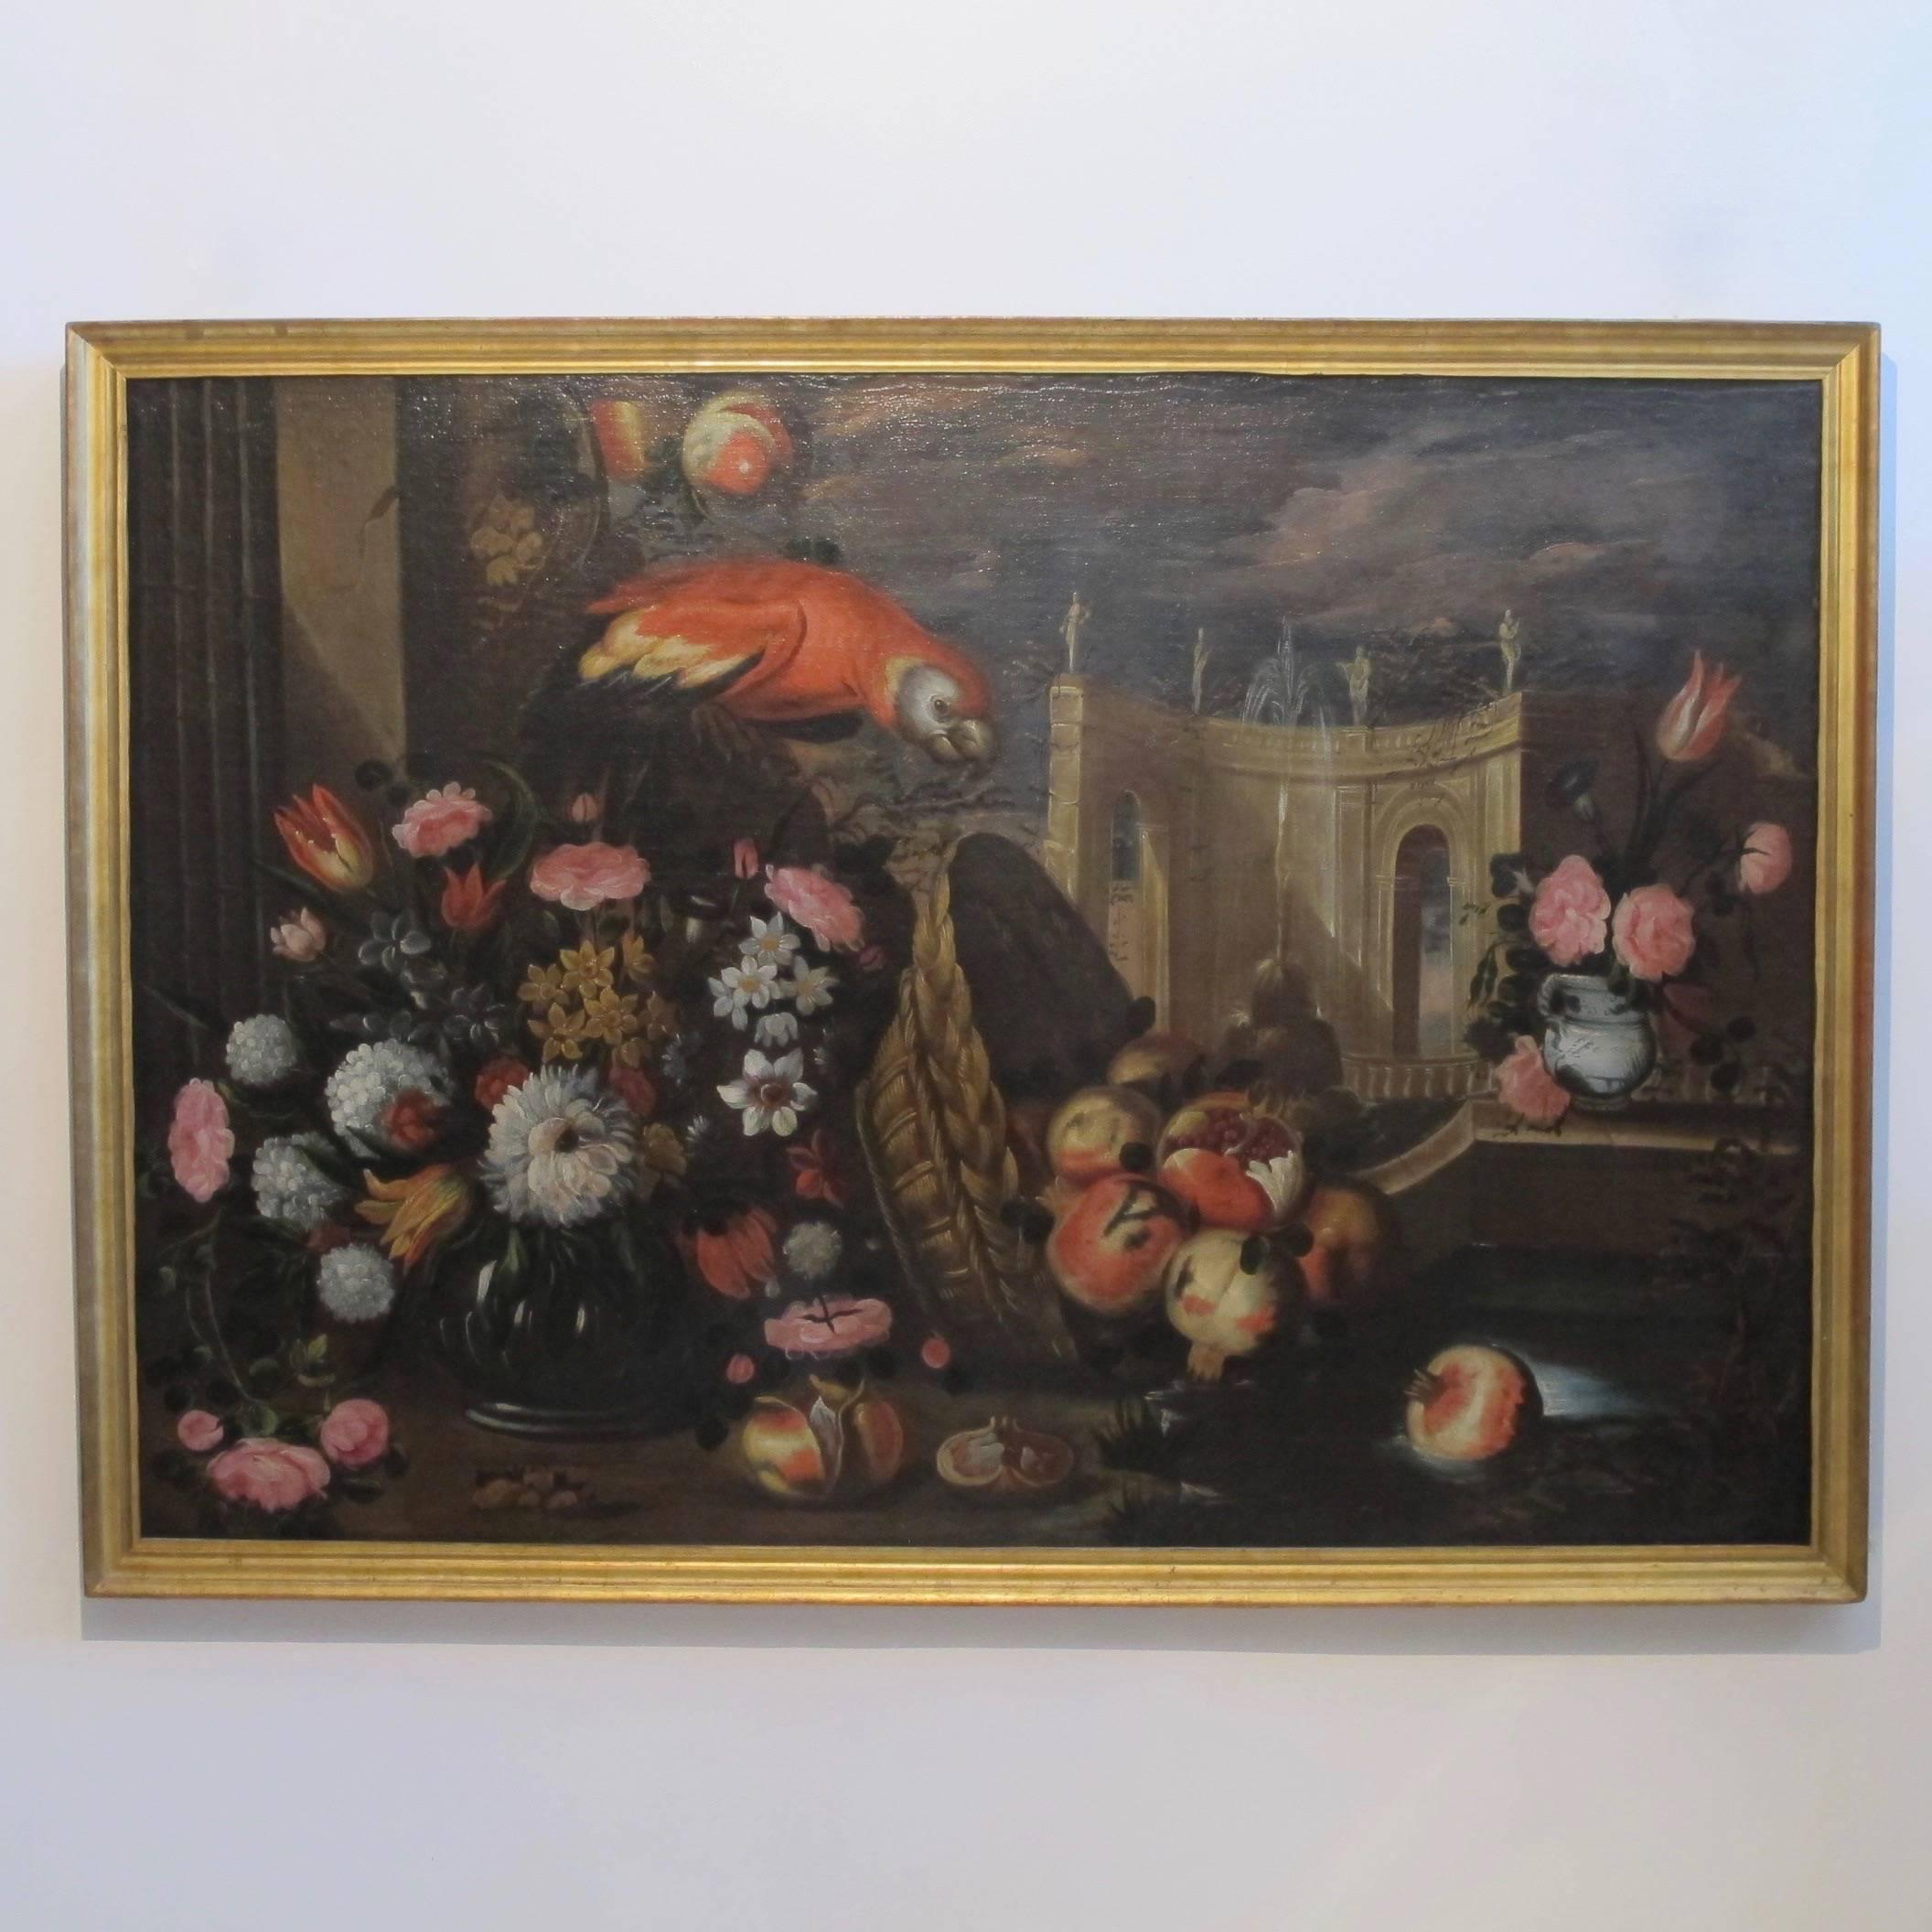 Hand-Painted Large 18th Century Italian Still Life Oil Painting with Parrot and Flowers For Sale